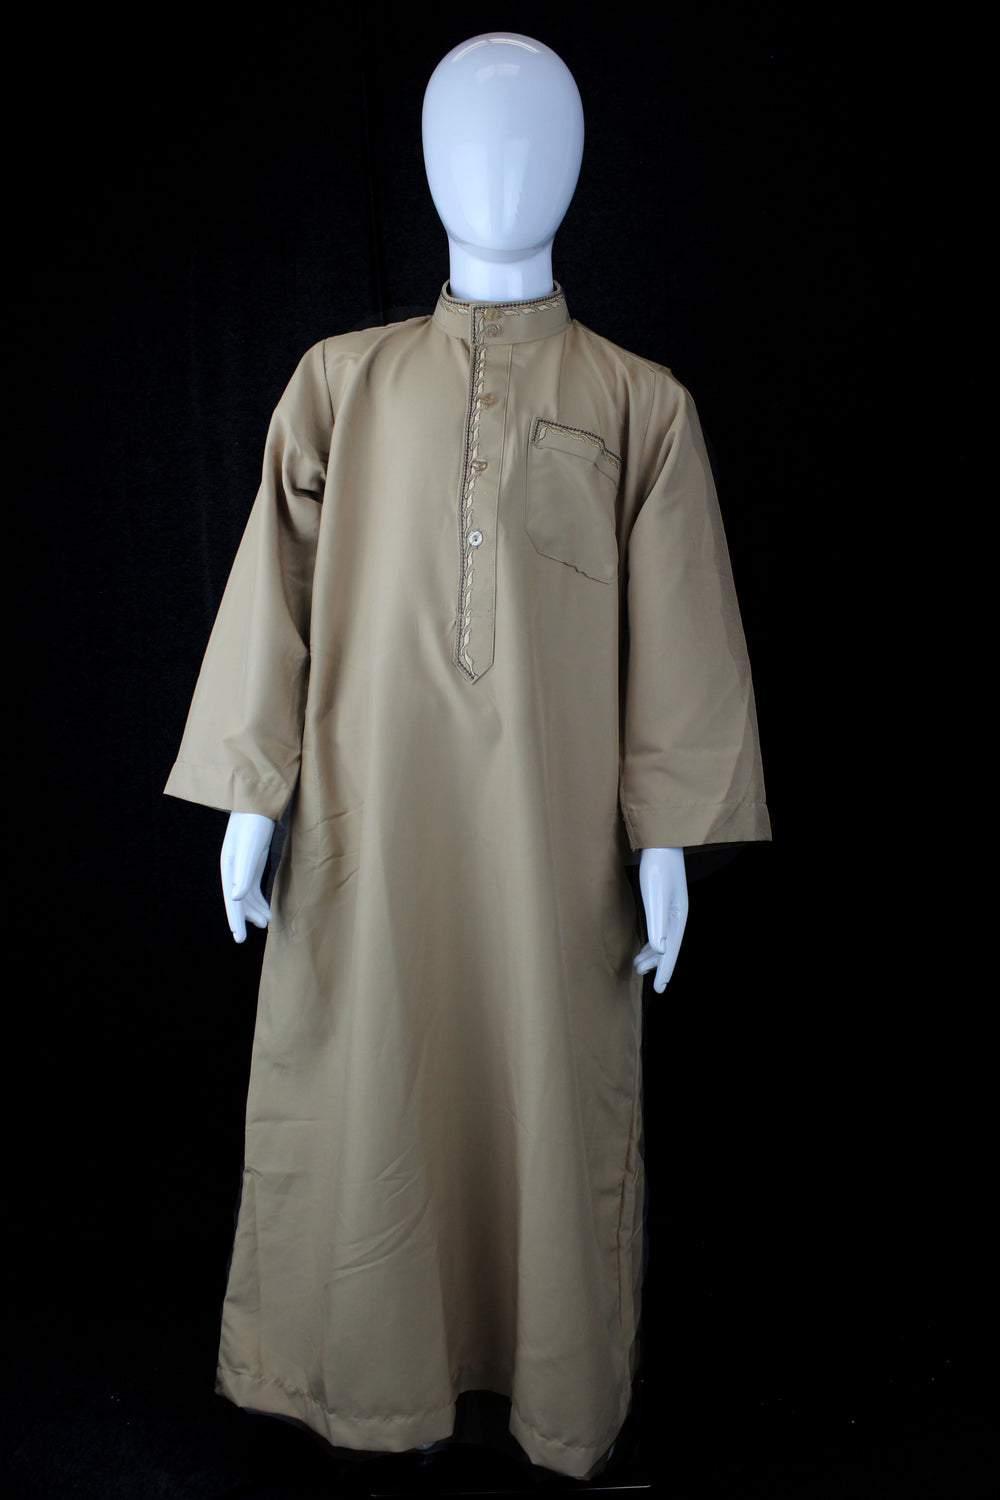 tan boy's jilbab with a collar and embroidery